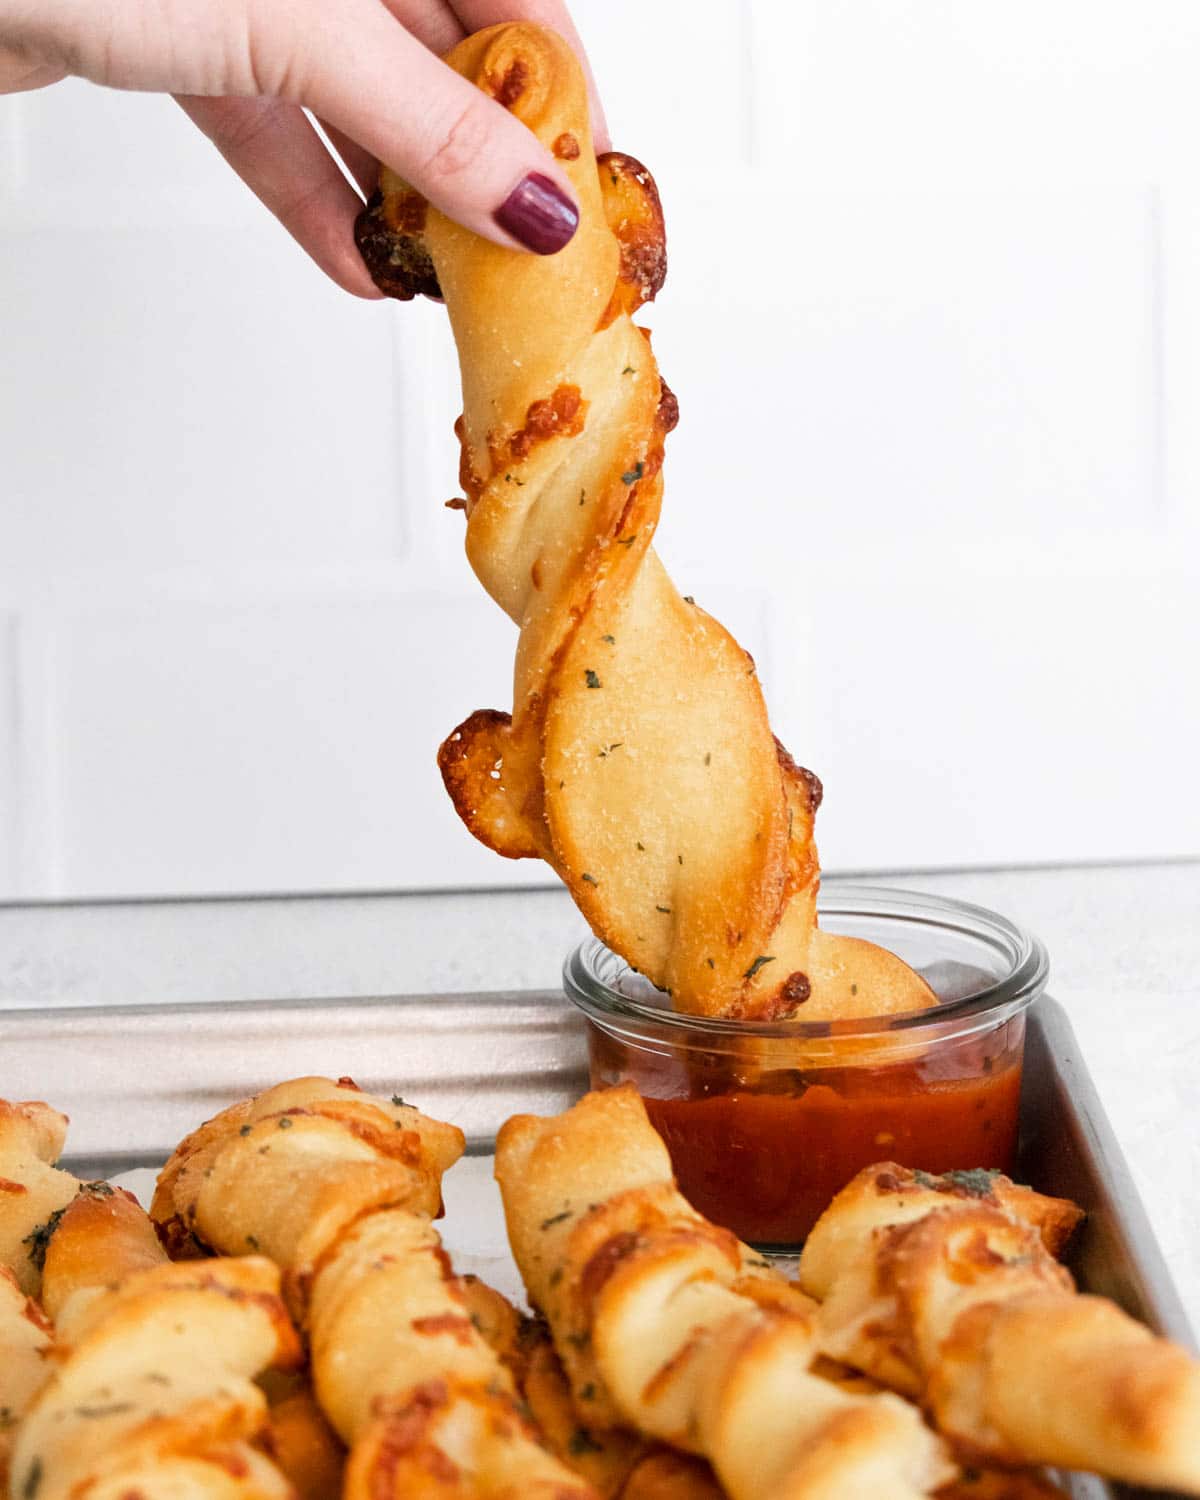 Pizza twists being dipped in sauce